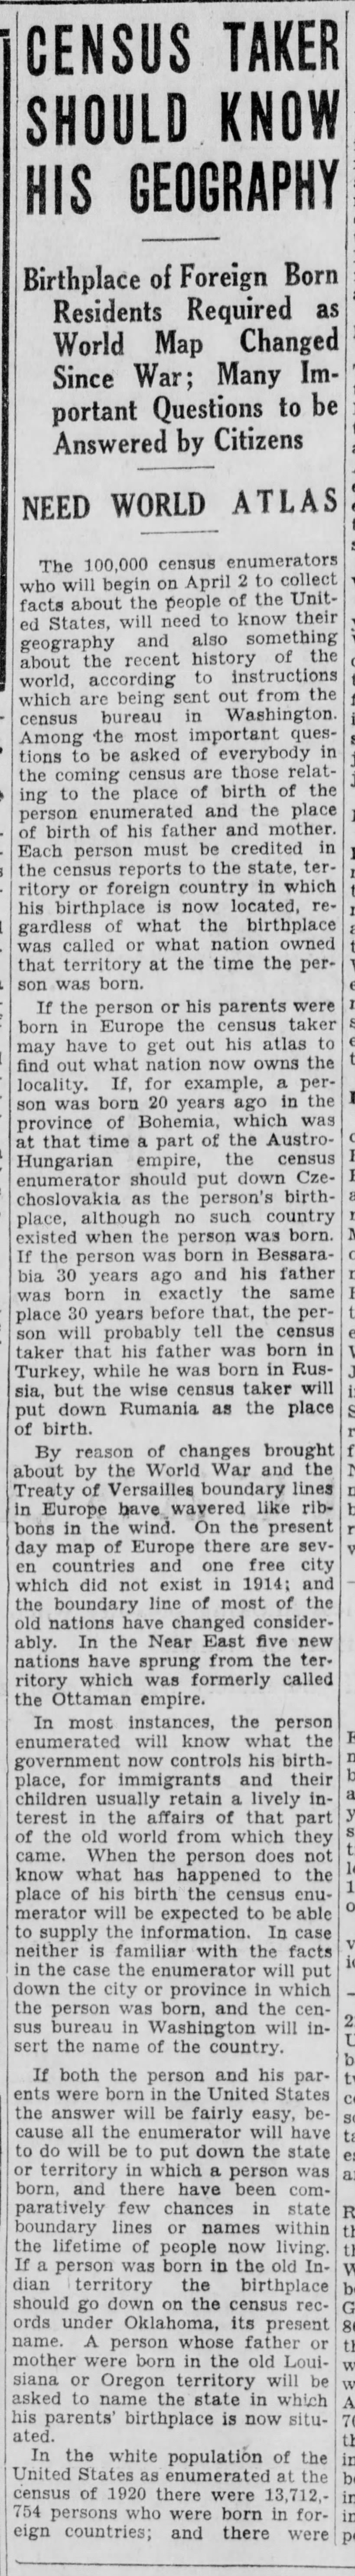 1930 Census tracks birthplace of parents